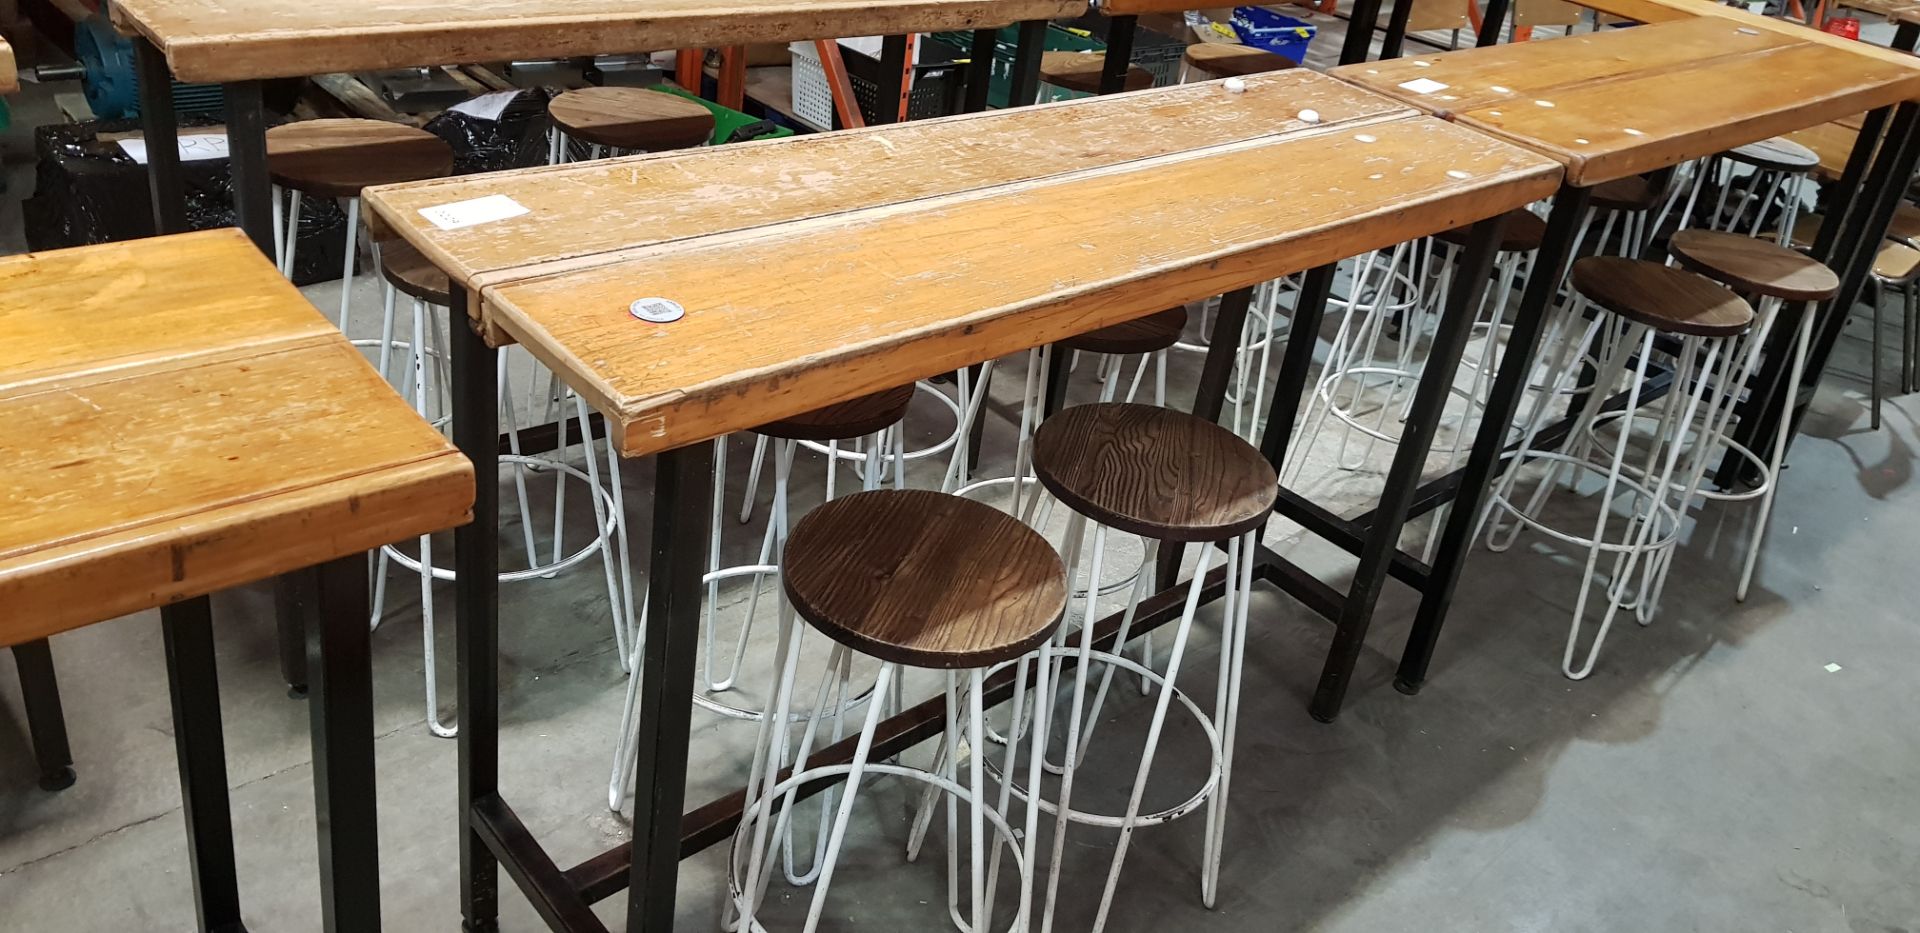 1 X WOODEN TOP TABLE WITH 4 X BAR STOOL CHAIRS - SIZE 110CM X 50CM X 167CM